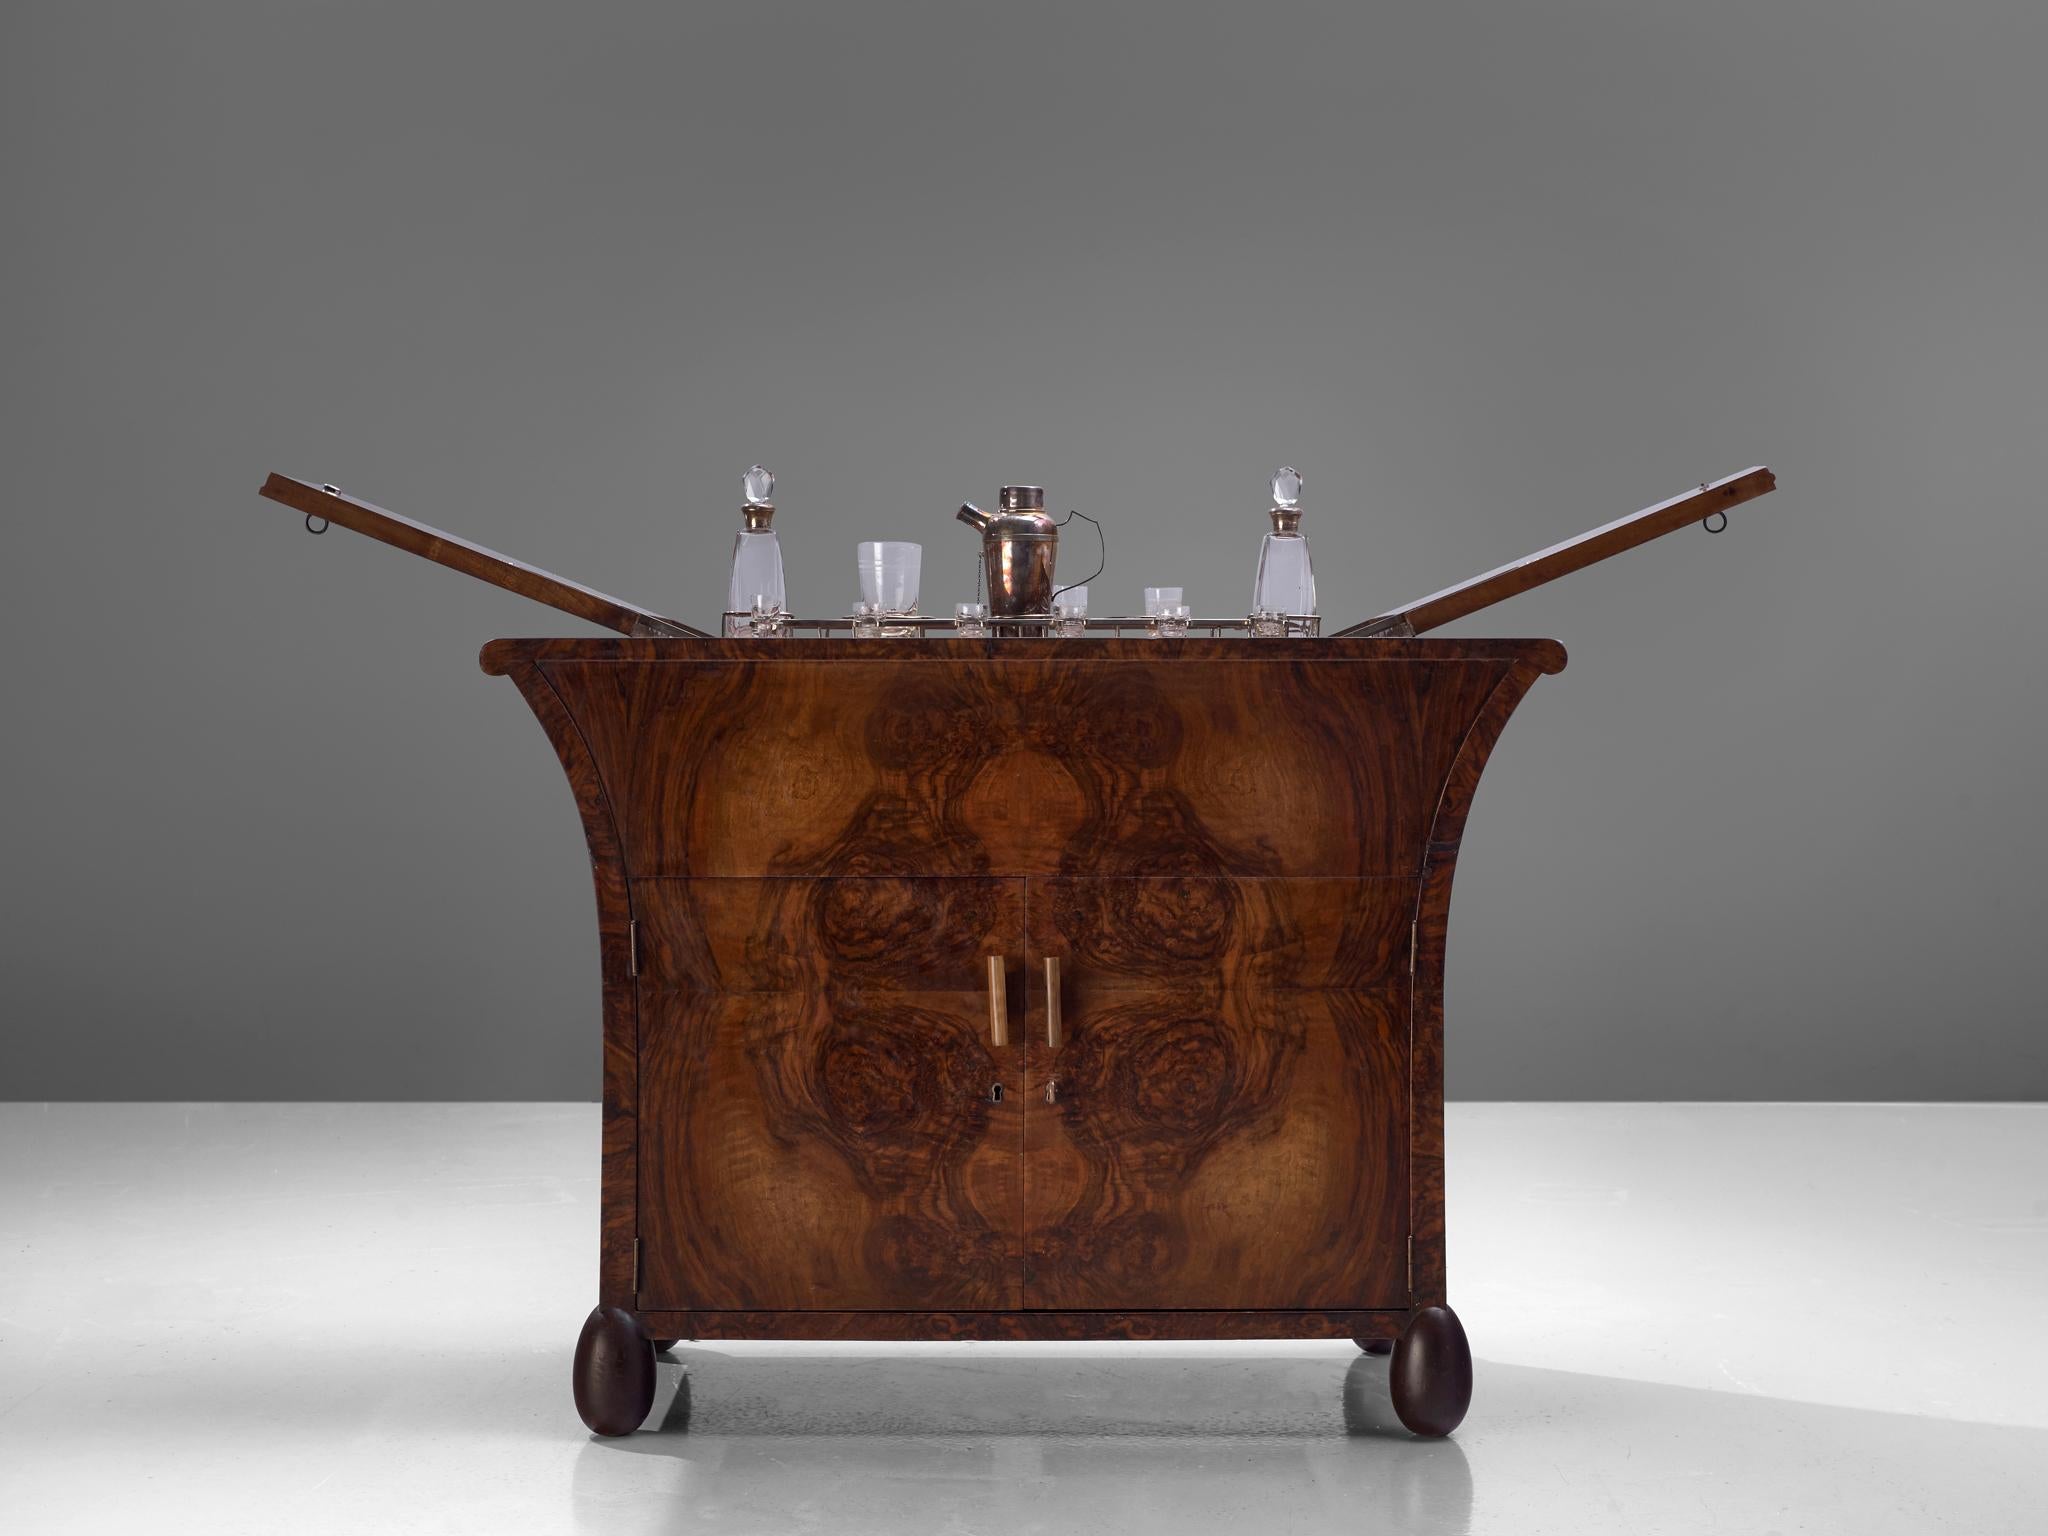 Enrico Premoli, dry bar, burl wood and metal, Italy, 1950s

Luxurious bar cabinet designed by the Napoleon Enrico Premoli. The design is very sophisticated, with a fold out top. By opening the two doors, a platter reveals itself where you can